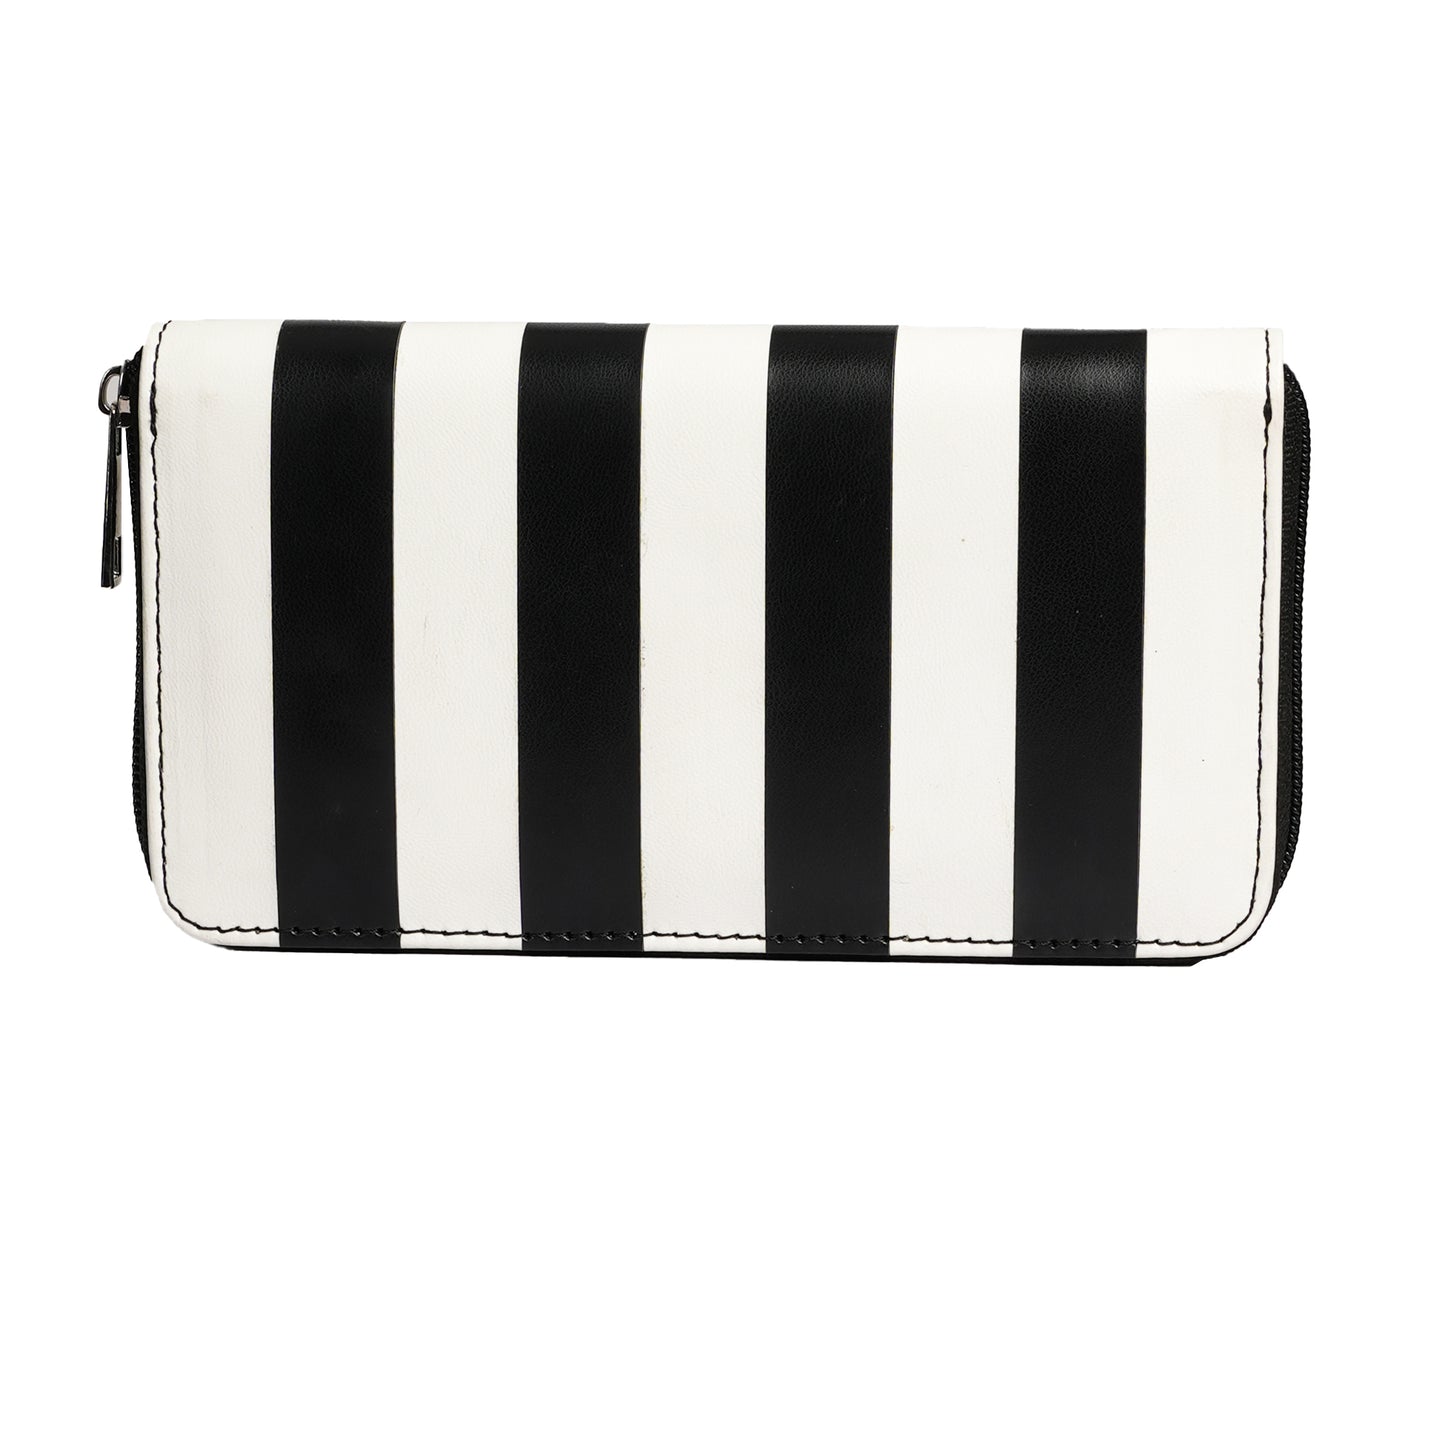 Duet Night Black and White Striped Clutch